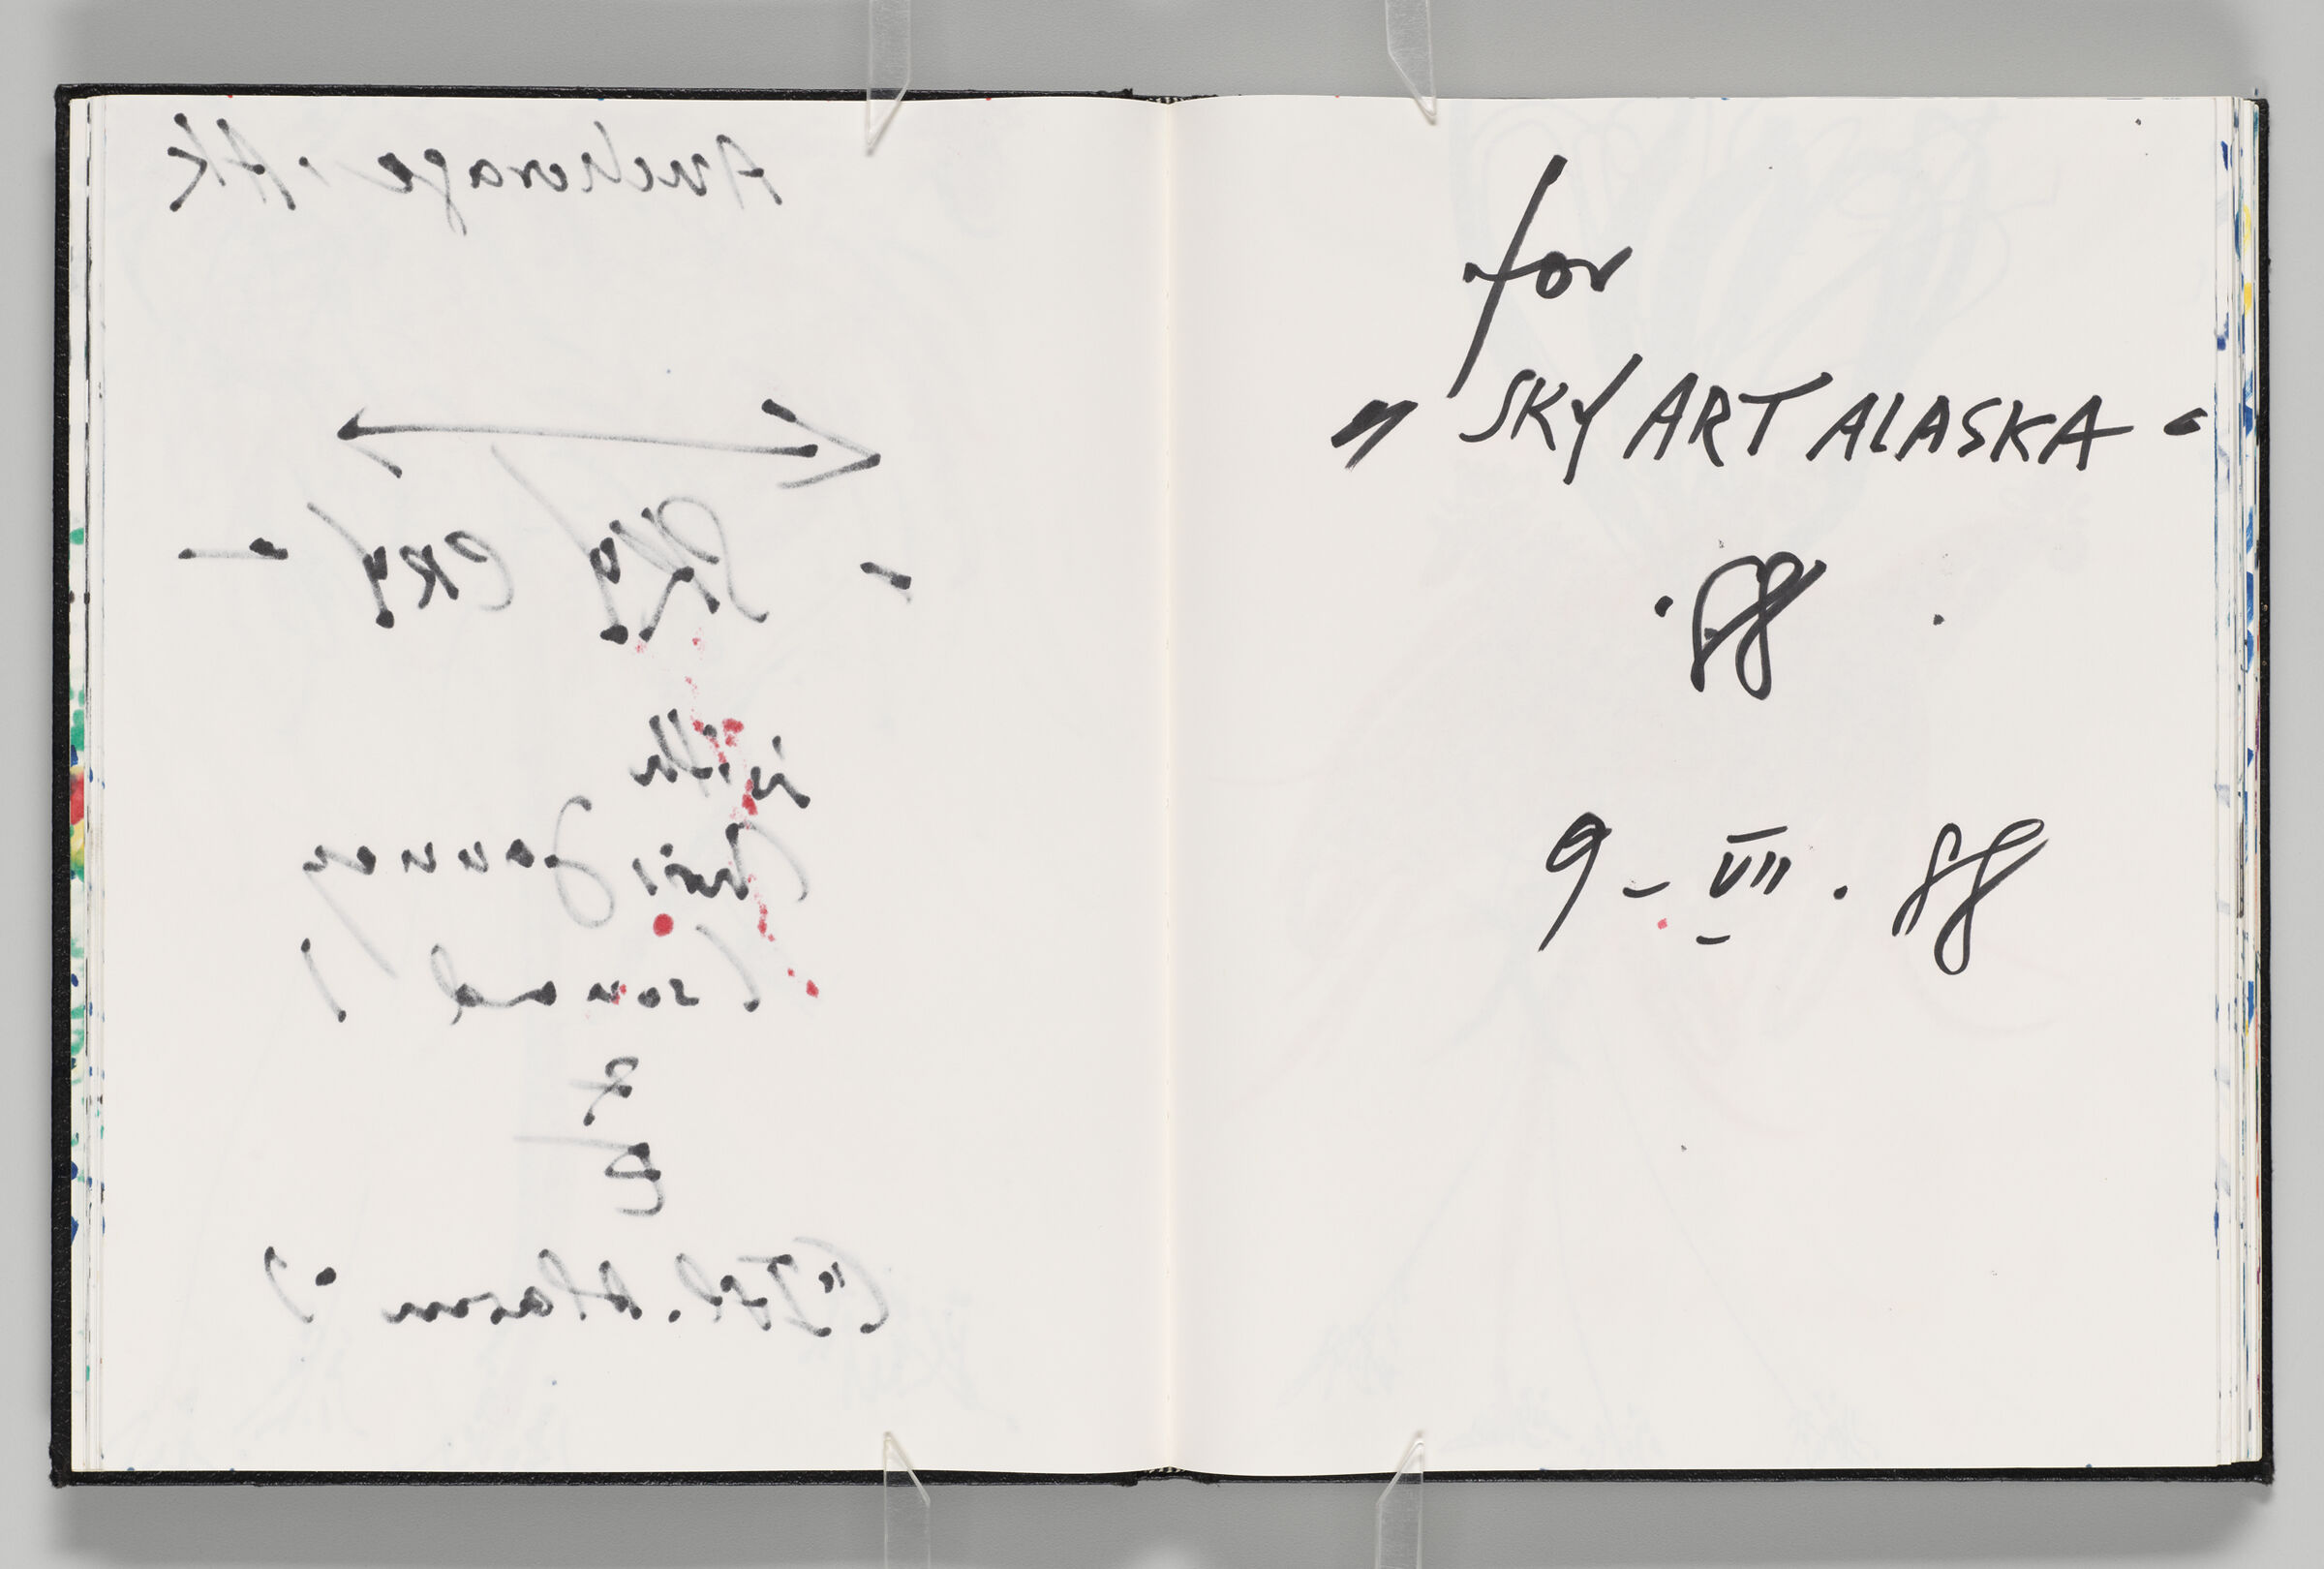 Untitled (Bleed-Through Of Previous Page And Color Transfer, Left Page); Untitled (Note, Right Page)